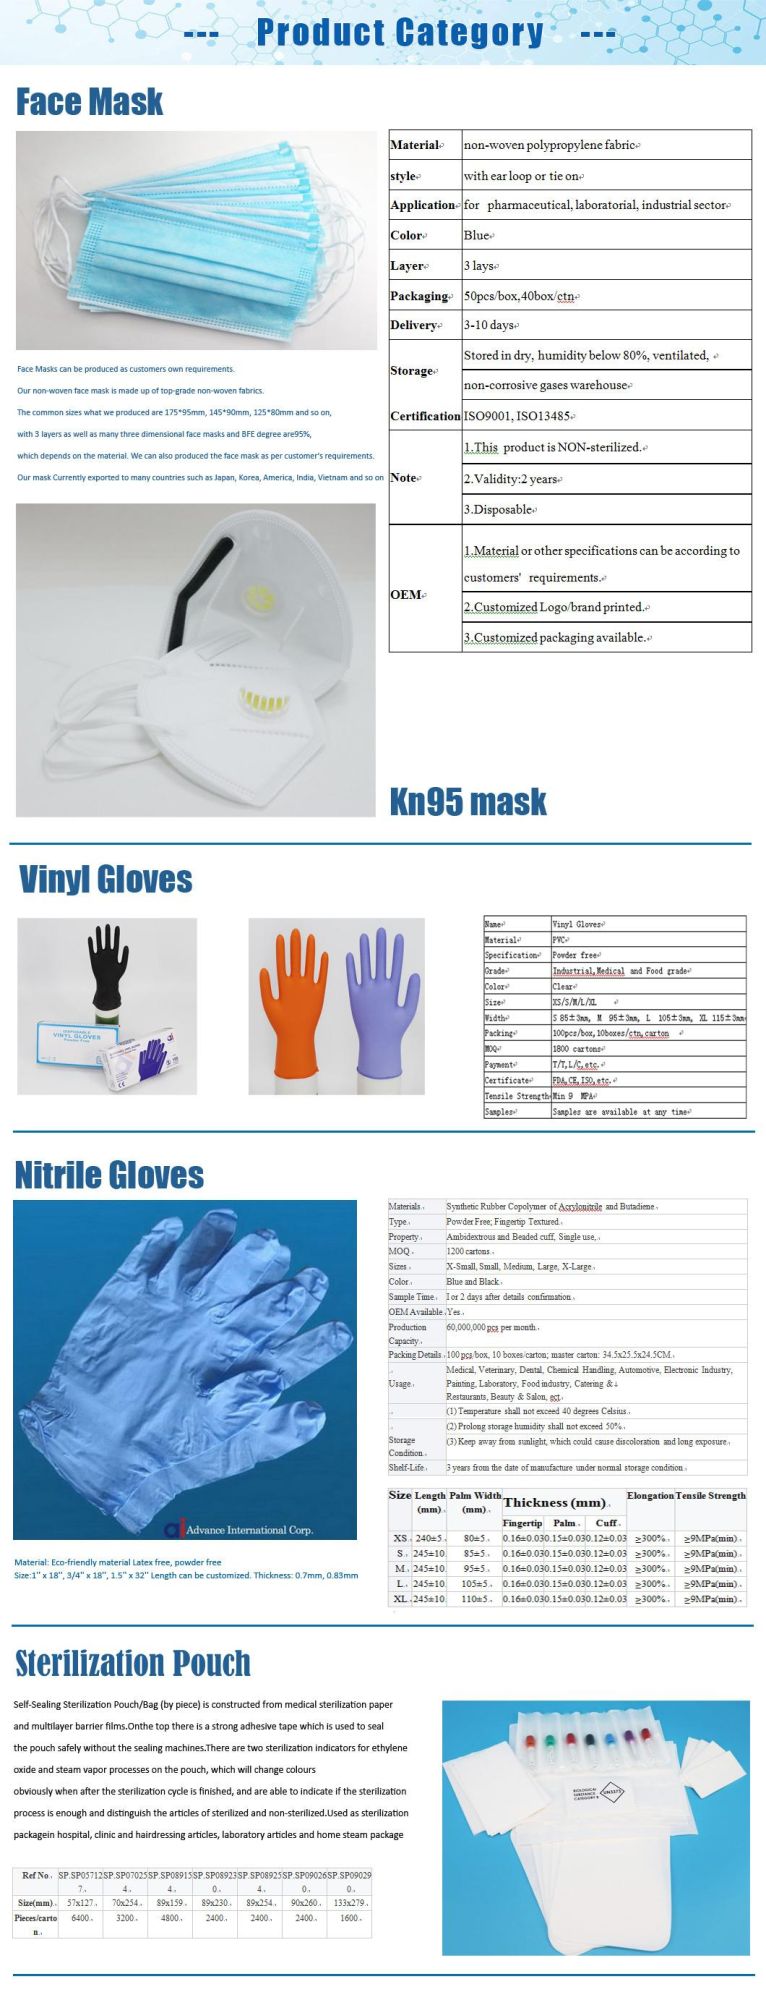 High Quality Disposable Medical Gloves Powder Free Gloves Vinyl Gloves in Low Price